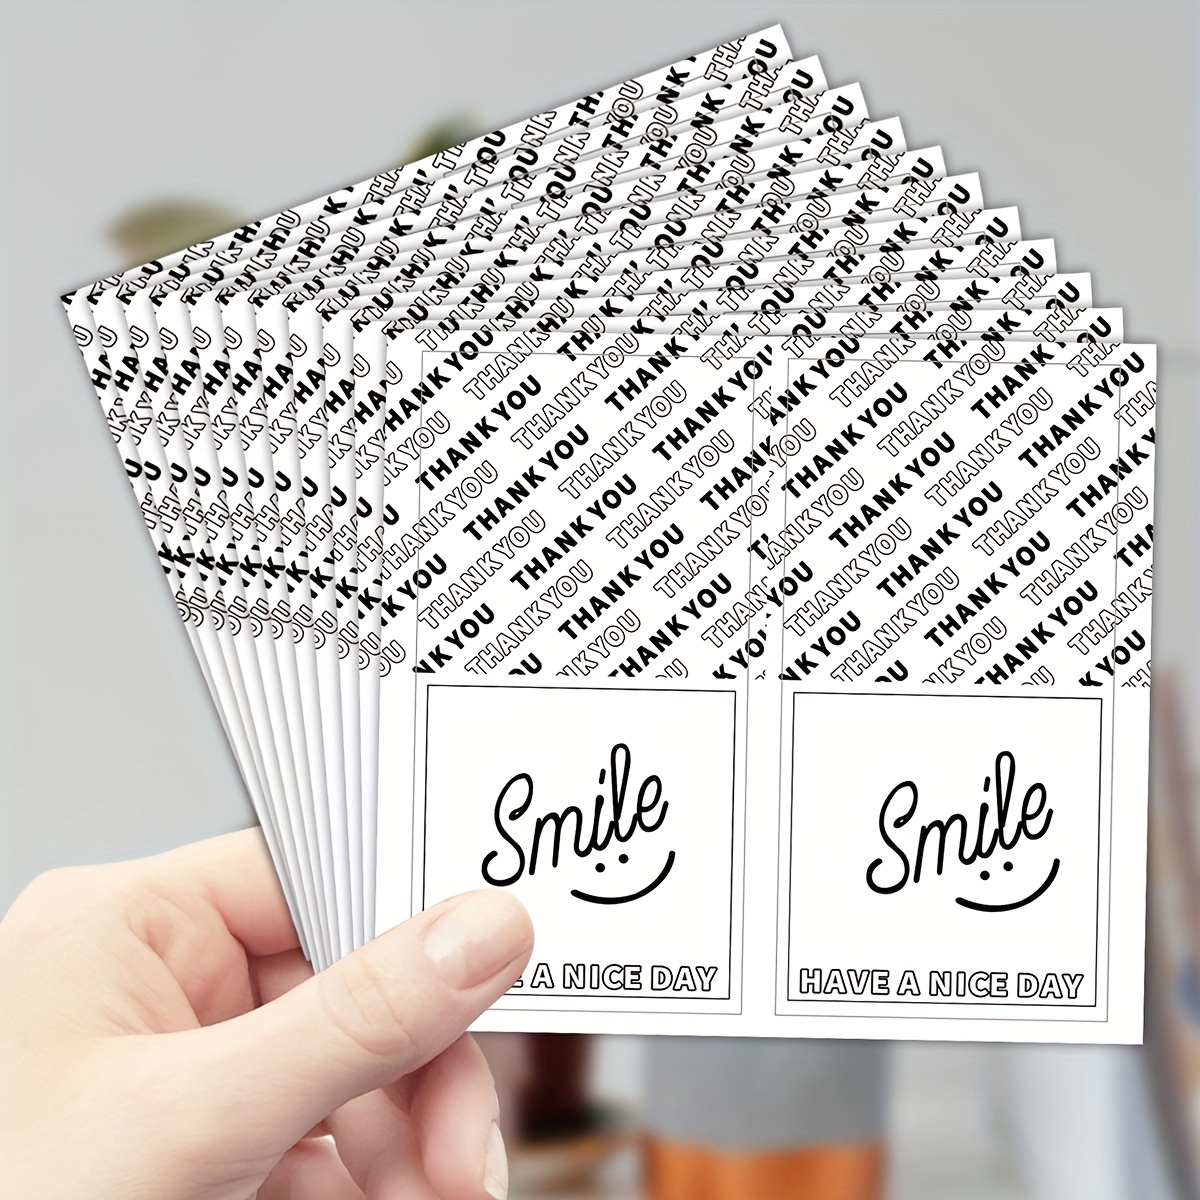 50pcs Small Size (4cm) Inspirational English Letter Stickers For Water  Bottles, Helmets, Luggage, Notebooks, Etc.